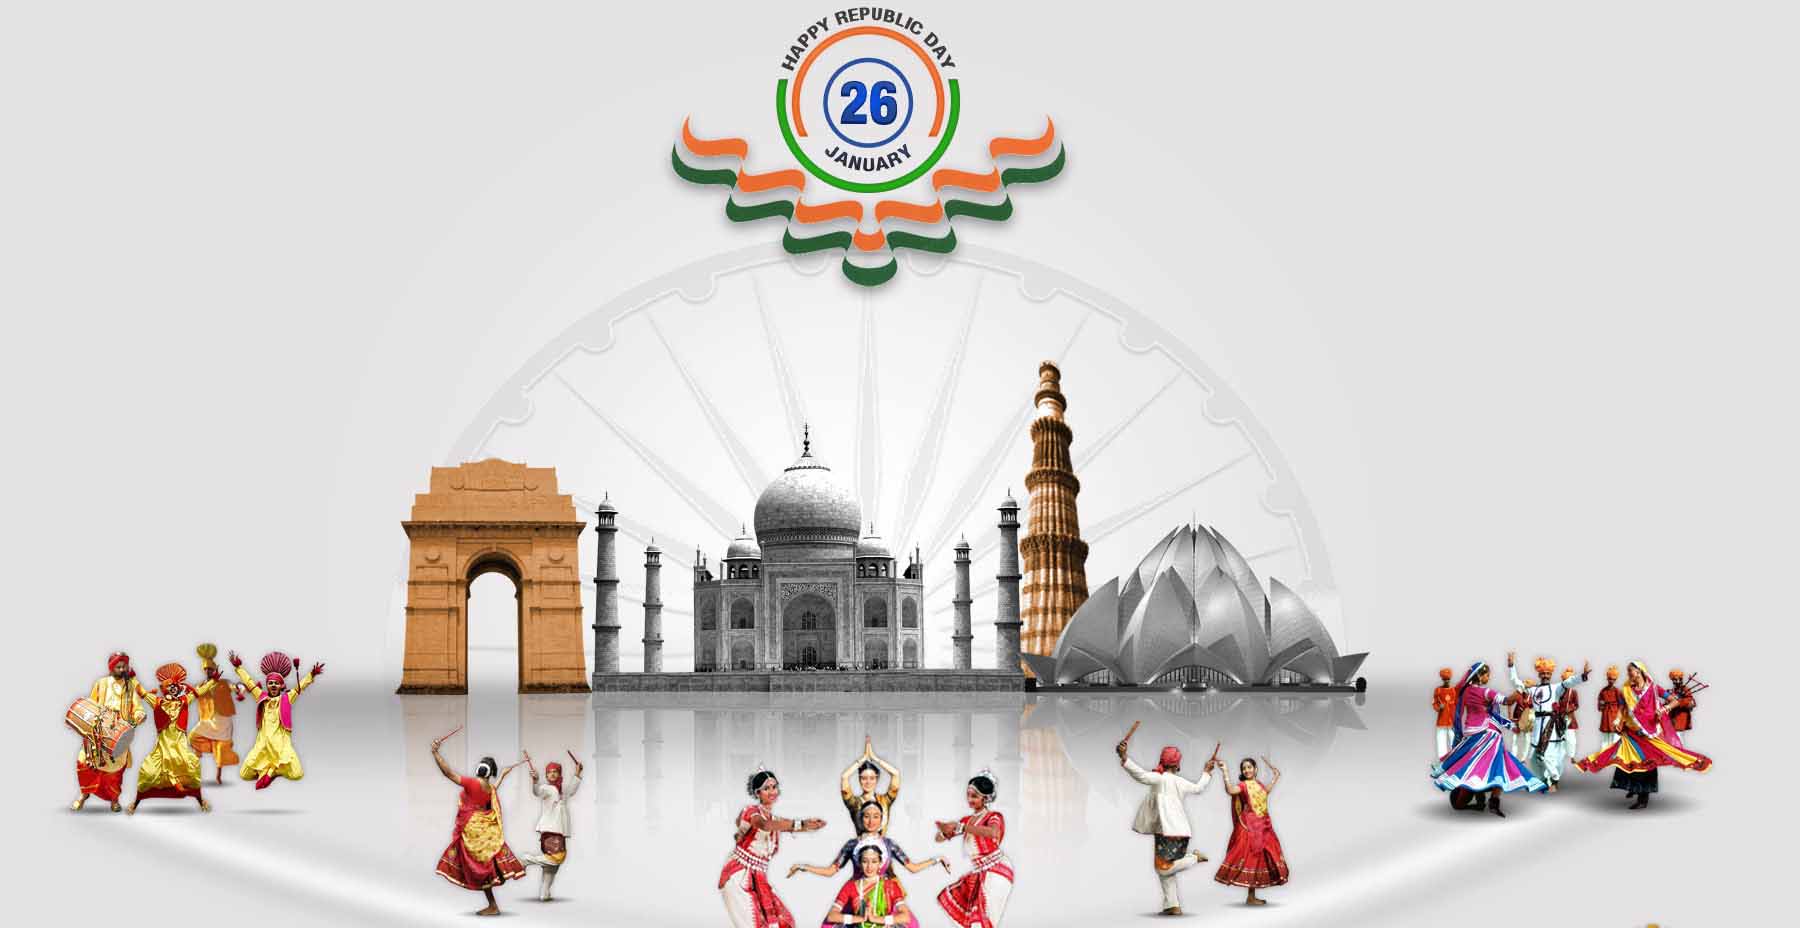 26 January Hd Wallpapers Images Pictures Photos Download - India Republic  Day - 1800x928 Wallpaper 